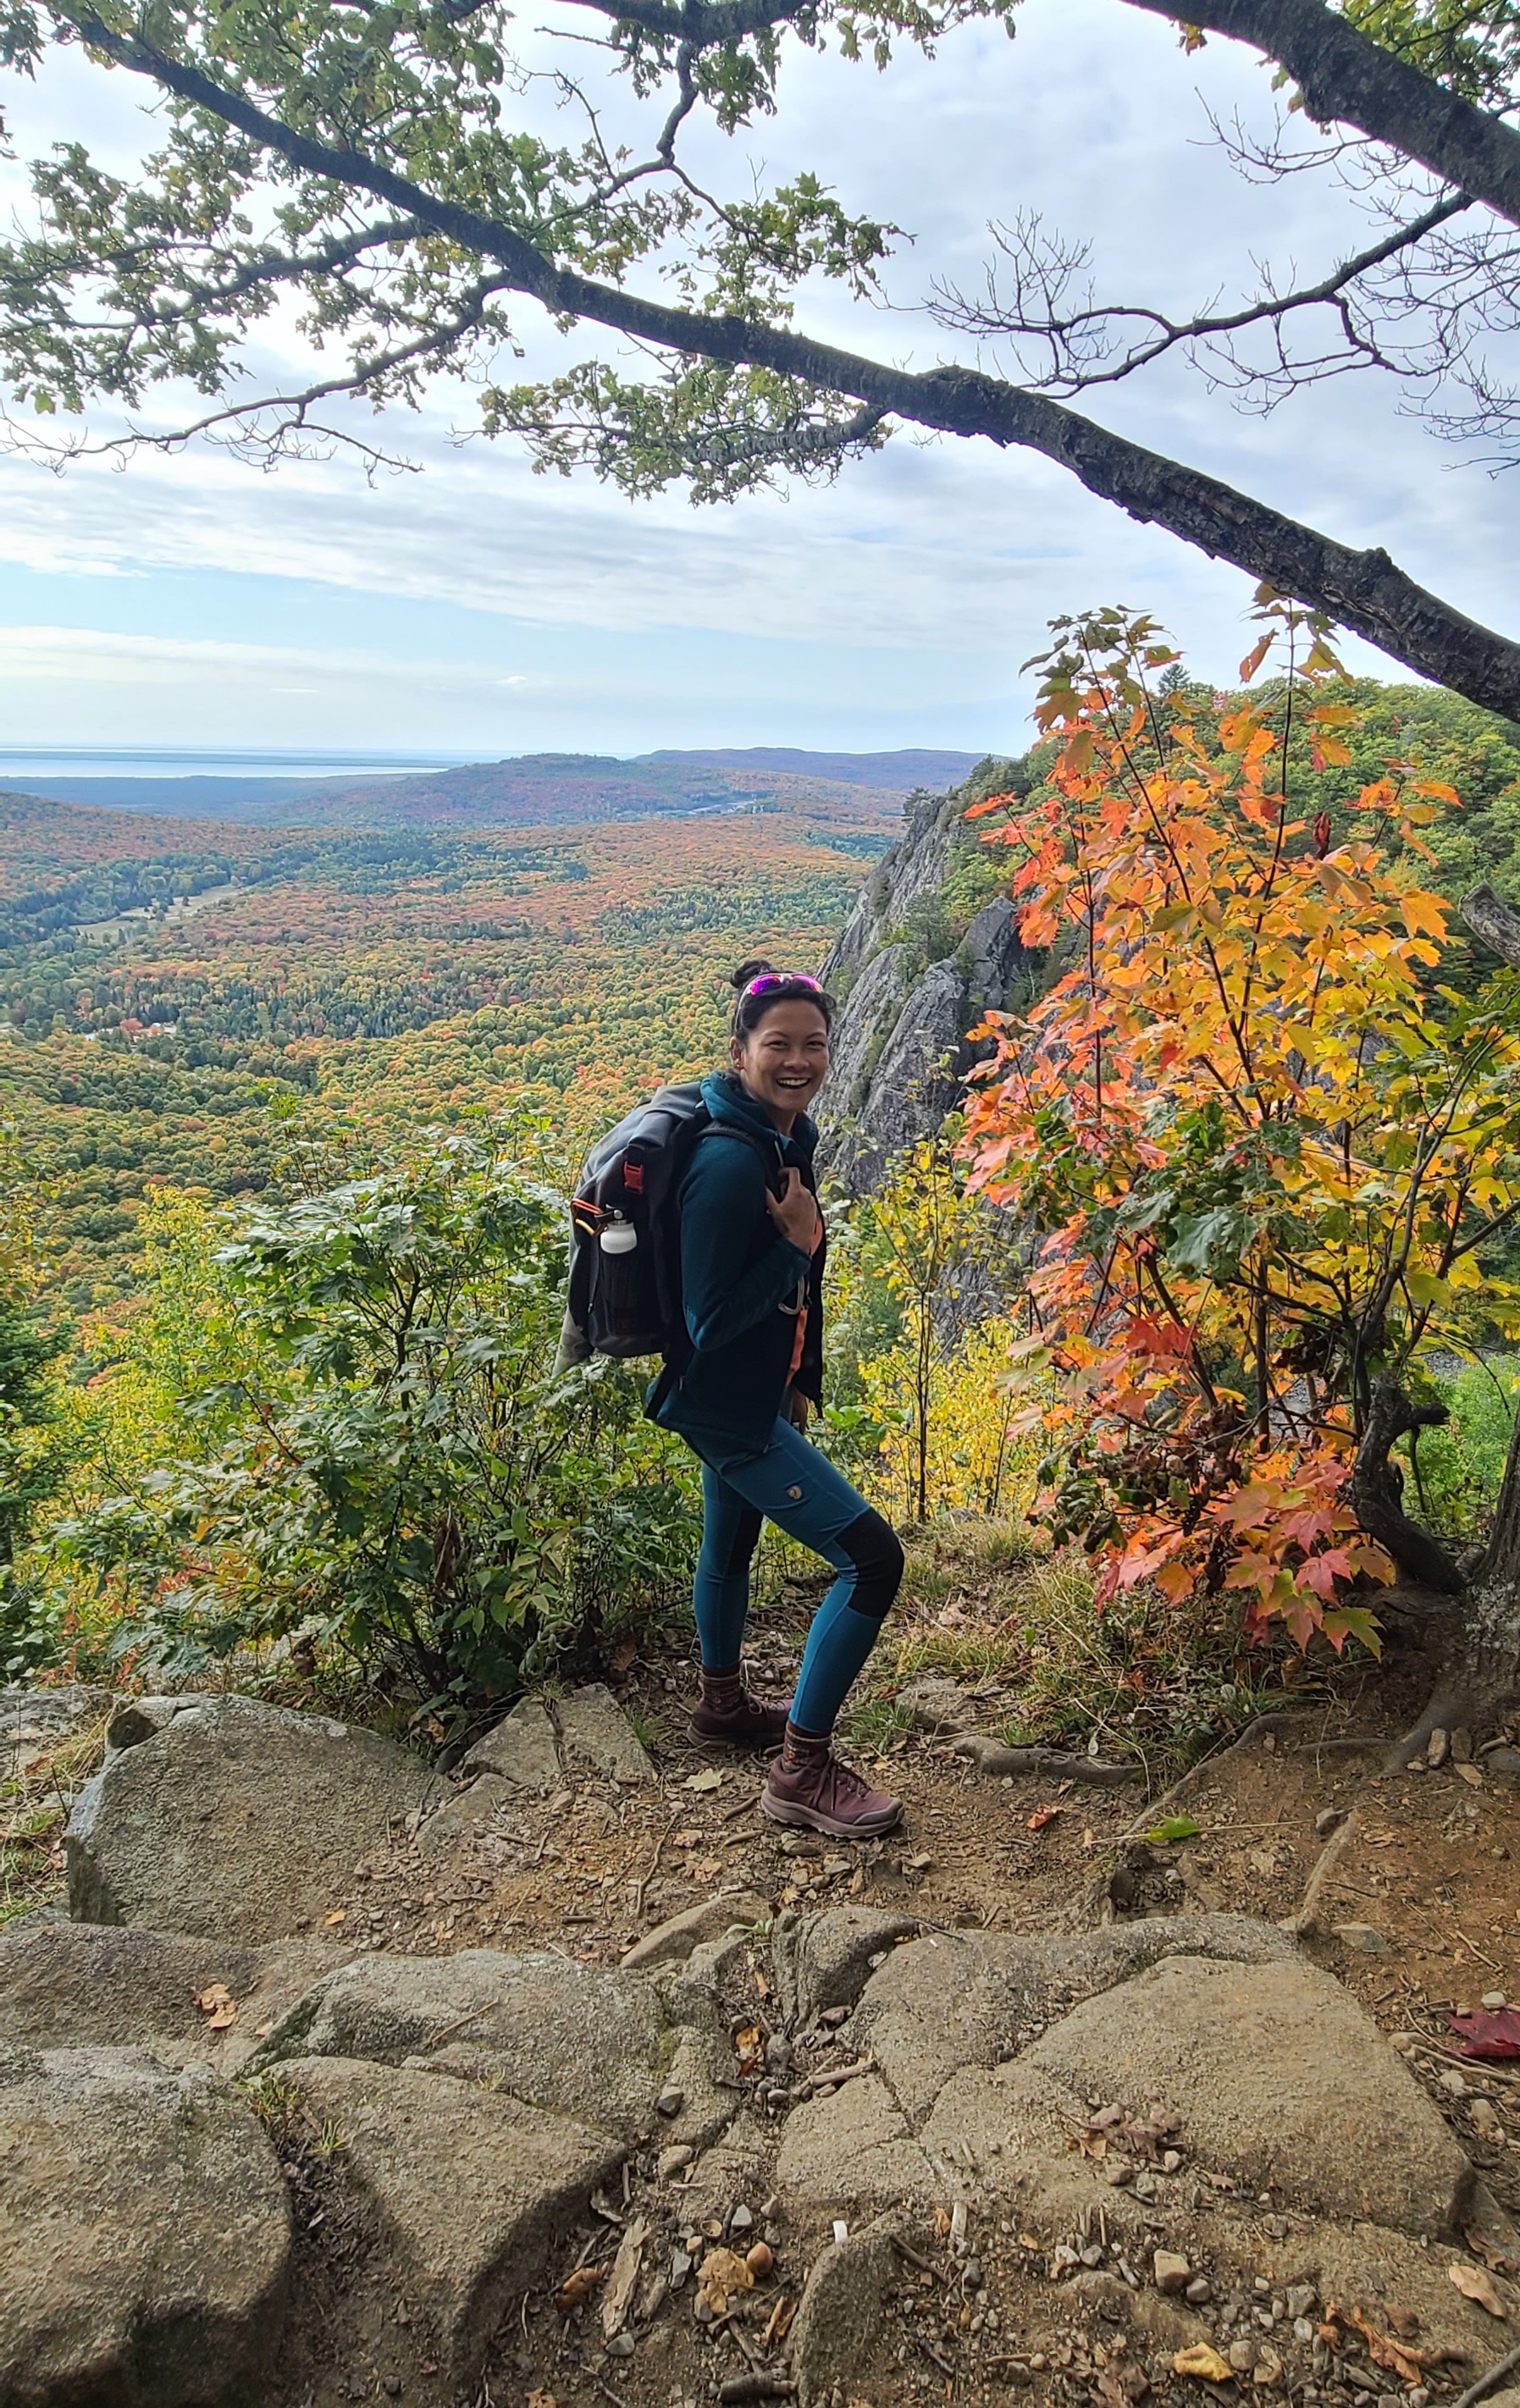 a smiling person wearing a backpack standing on a rocky cliff, with a broad green forest below and tree branches overhead.